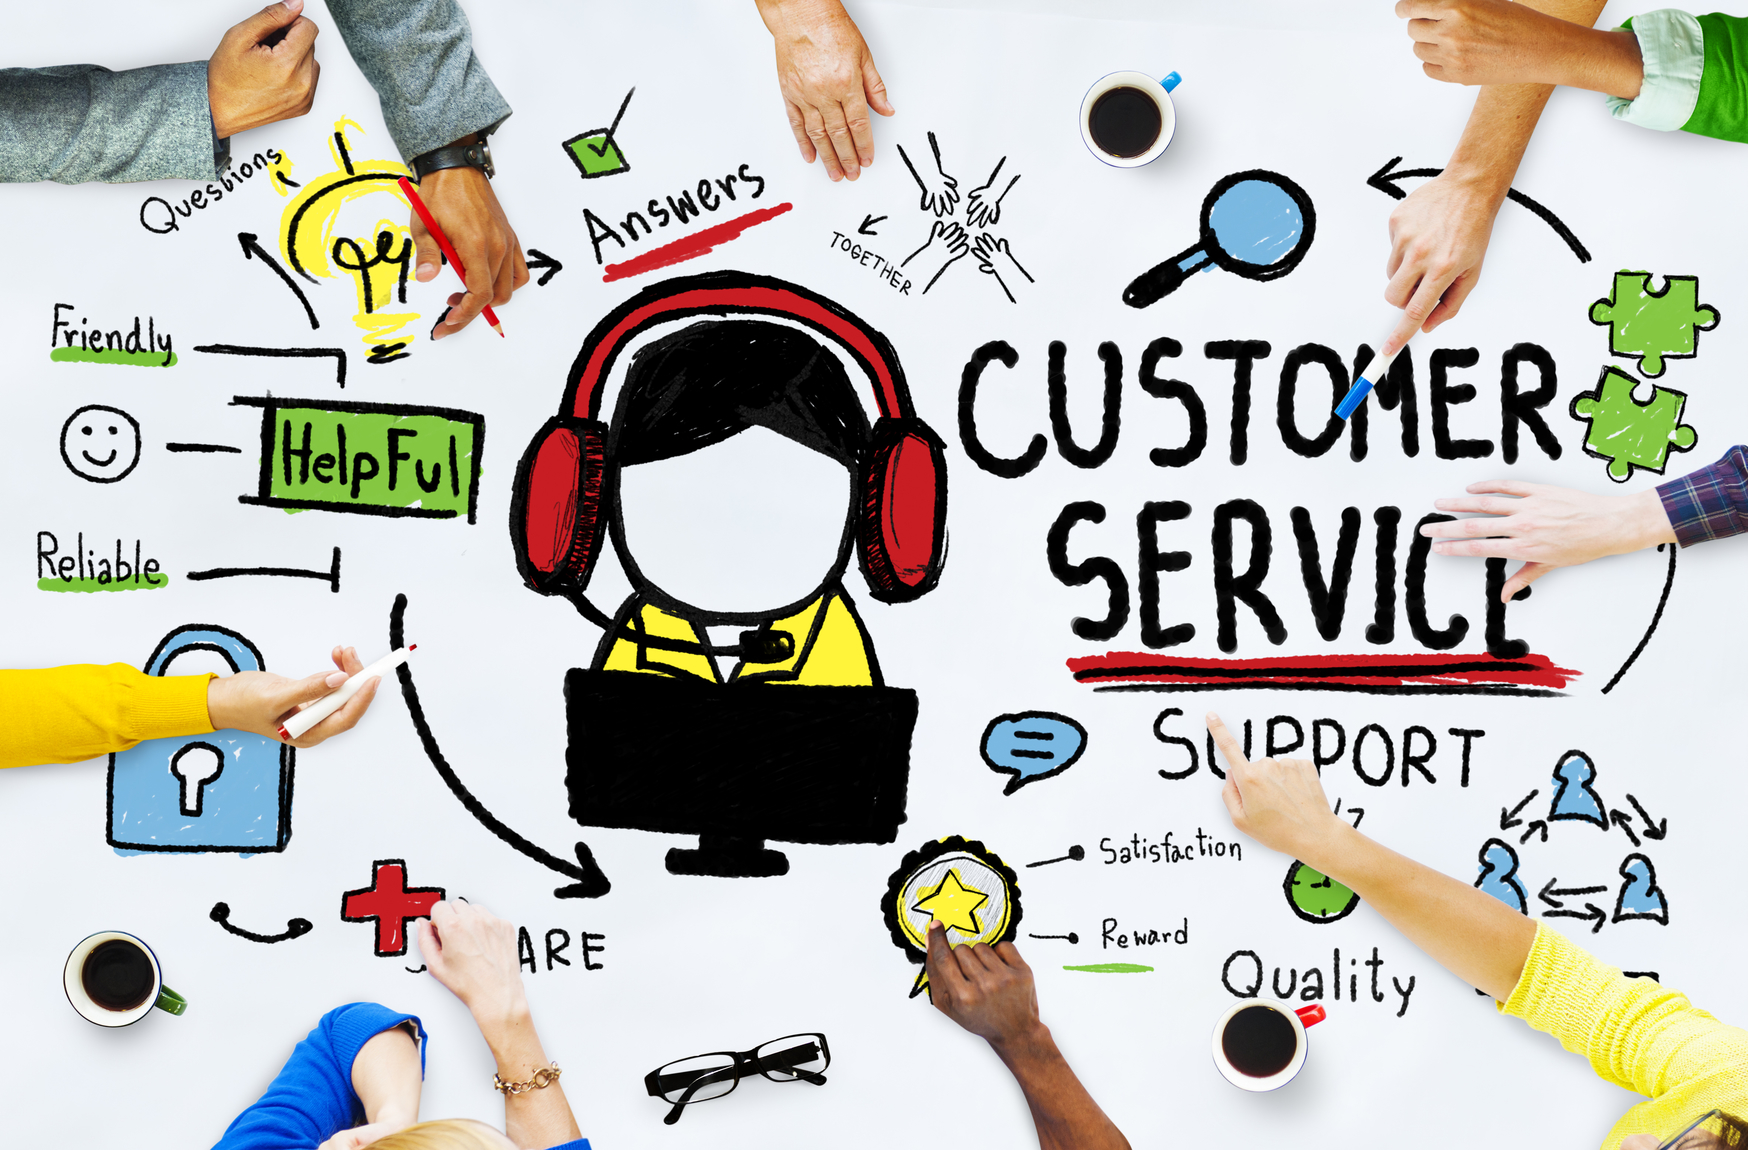 What are Customer Support Services and Why are They Important?